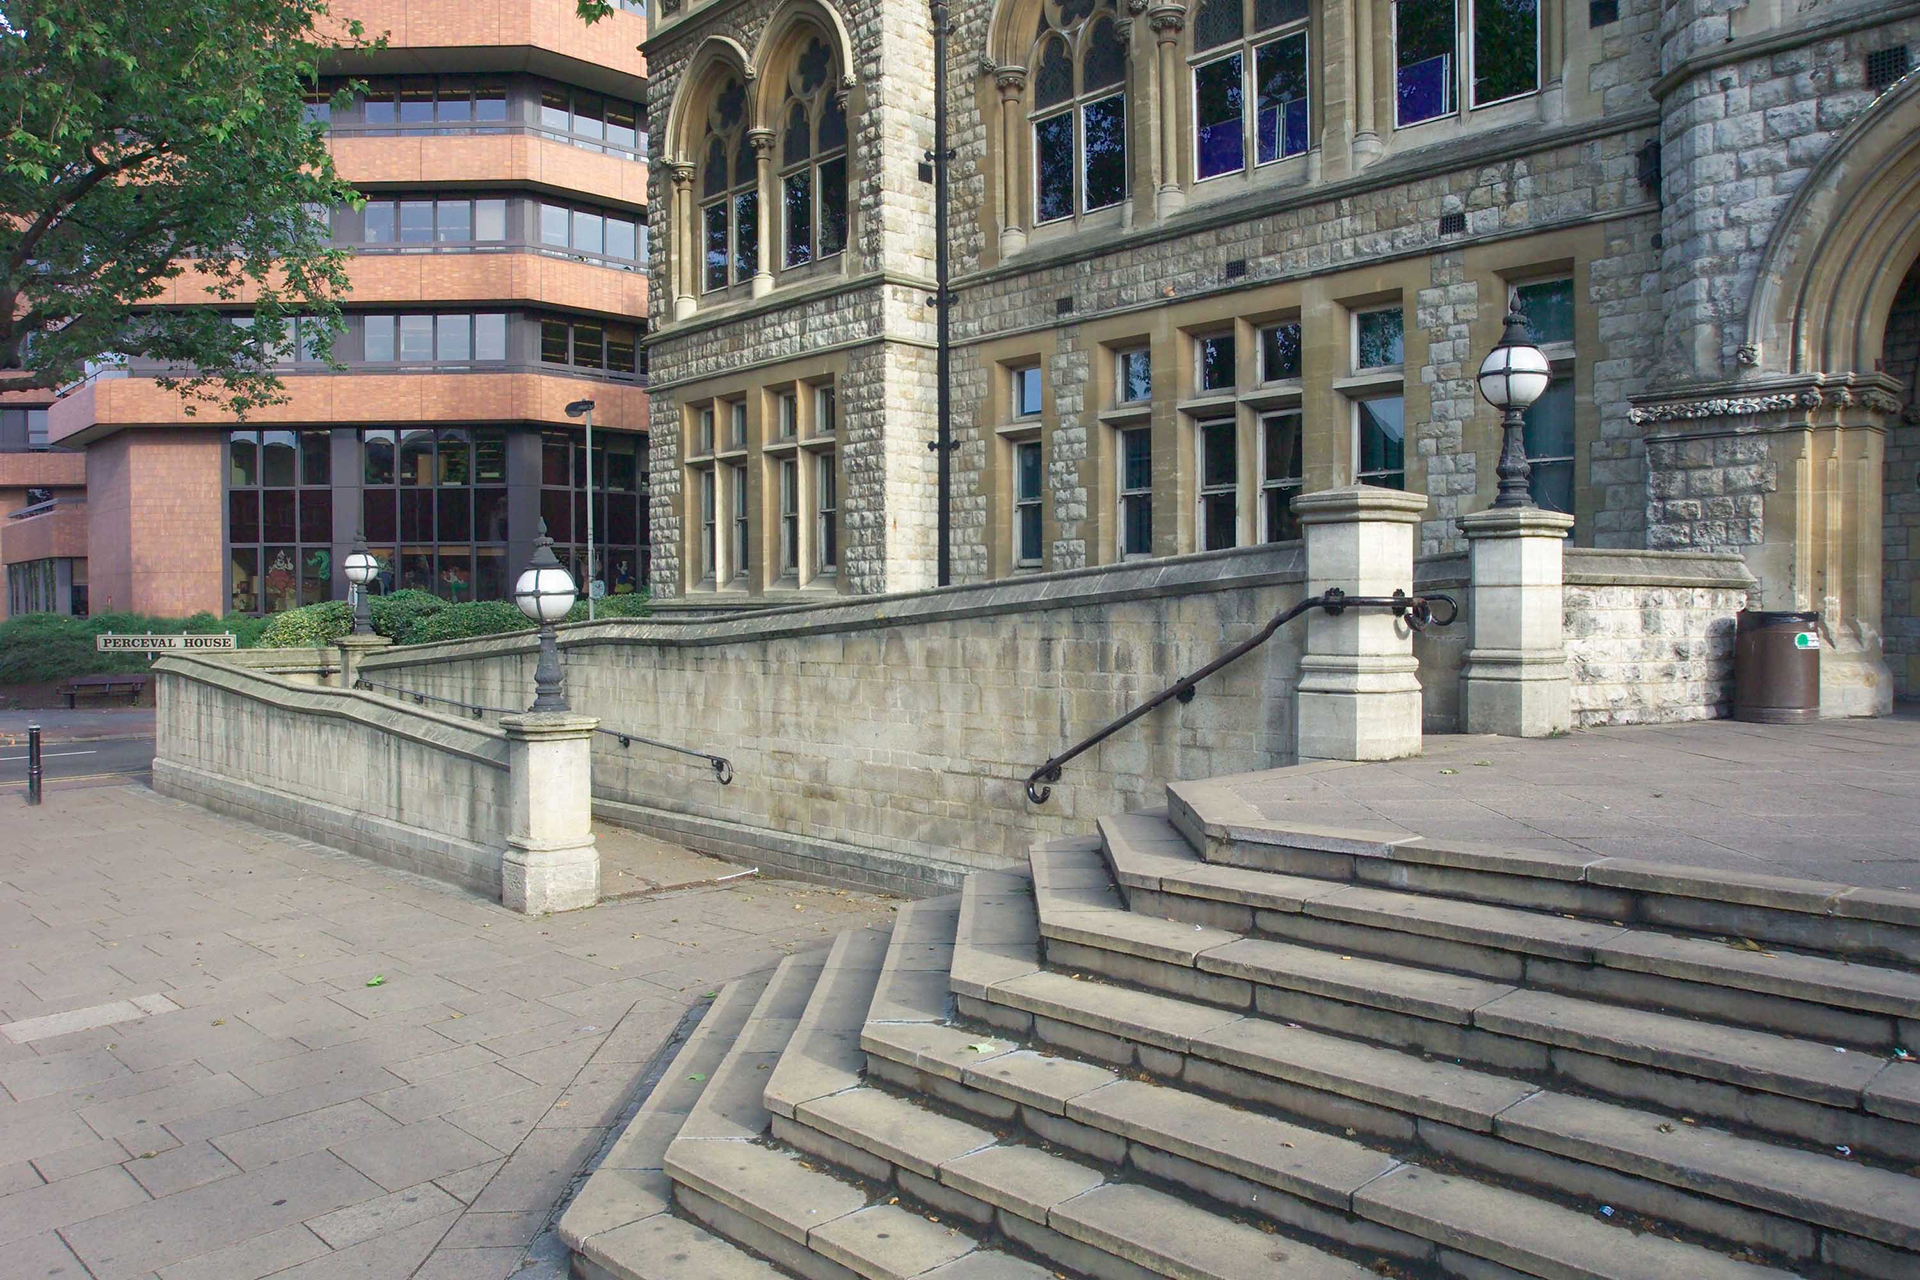 image of a ramp at Easling Town Hall, London, illustrating easy access to historic buildings